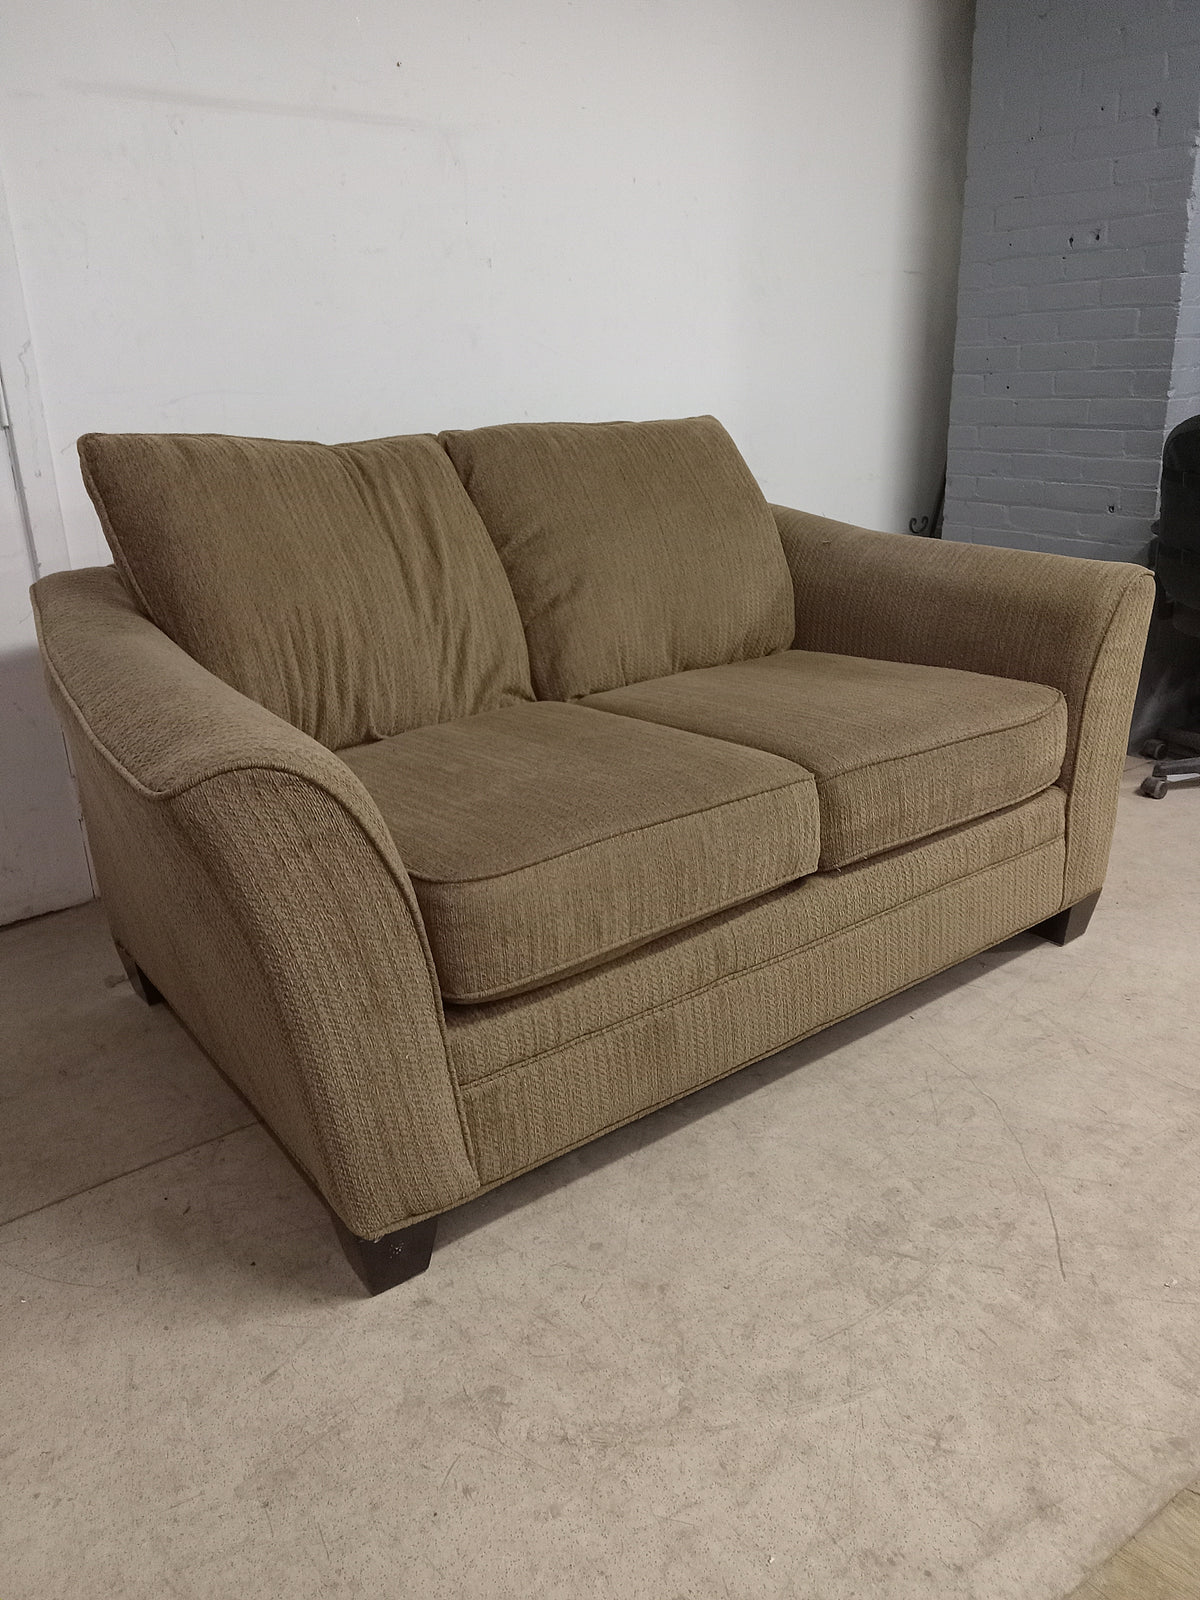 74"W Olive Green Upholstered Two Seater Loveseat